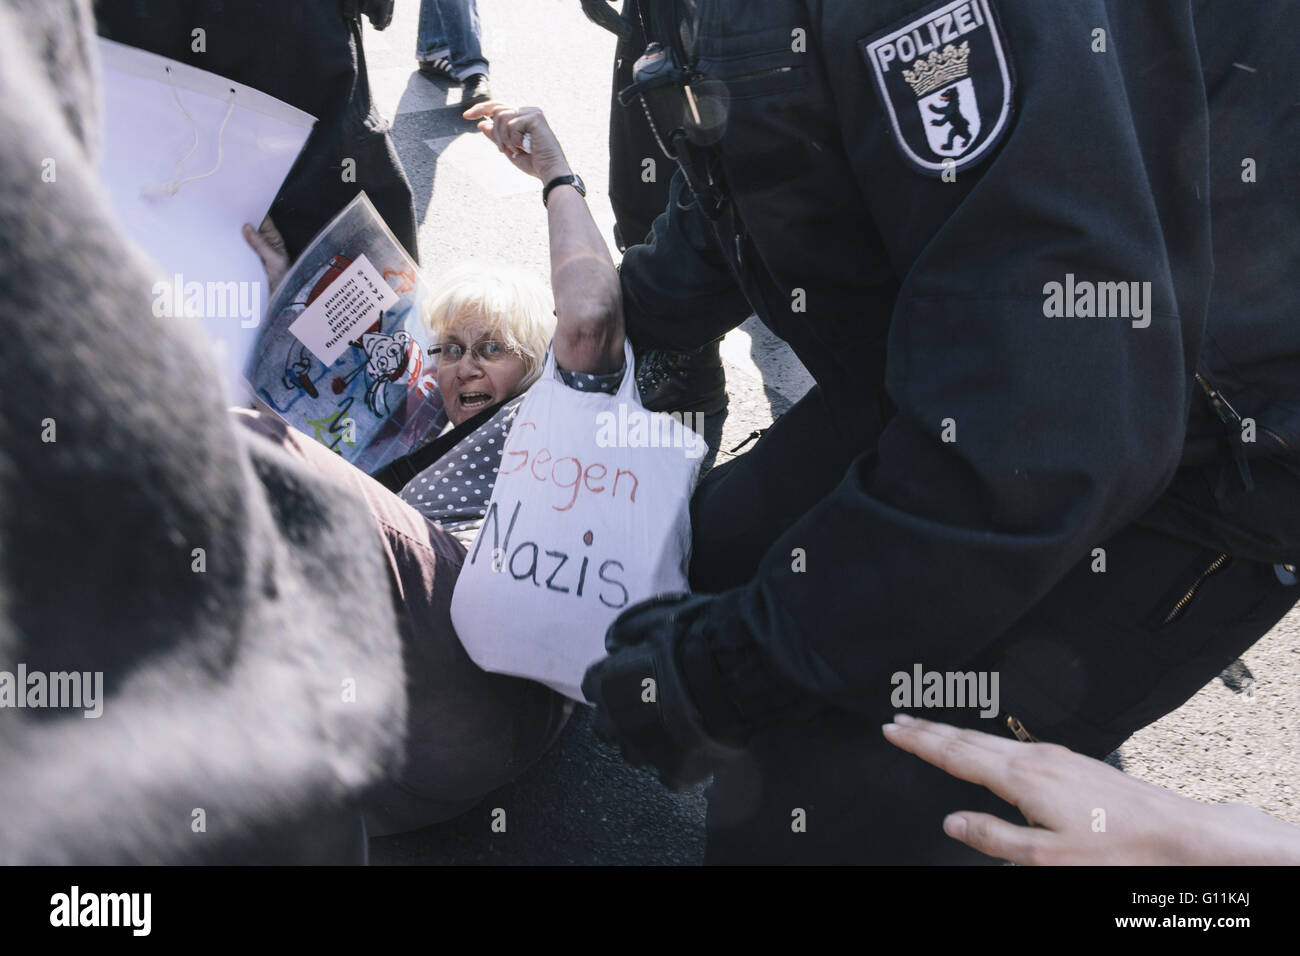 Berlin, Germany. 7th May, 2016. An elderly woman in conflict with the police during counter protests against the rally held under the motto 'Merkel muss weg! or 'Merkel must go' organised by far-right group 'We for Berlin & We for Germany.' © Jan Scheunert/ZUMA Wire/Alamy Live News Stock Photo